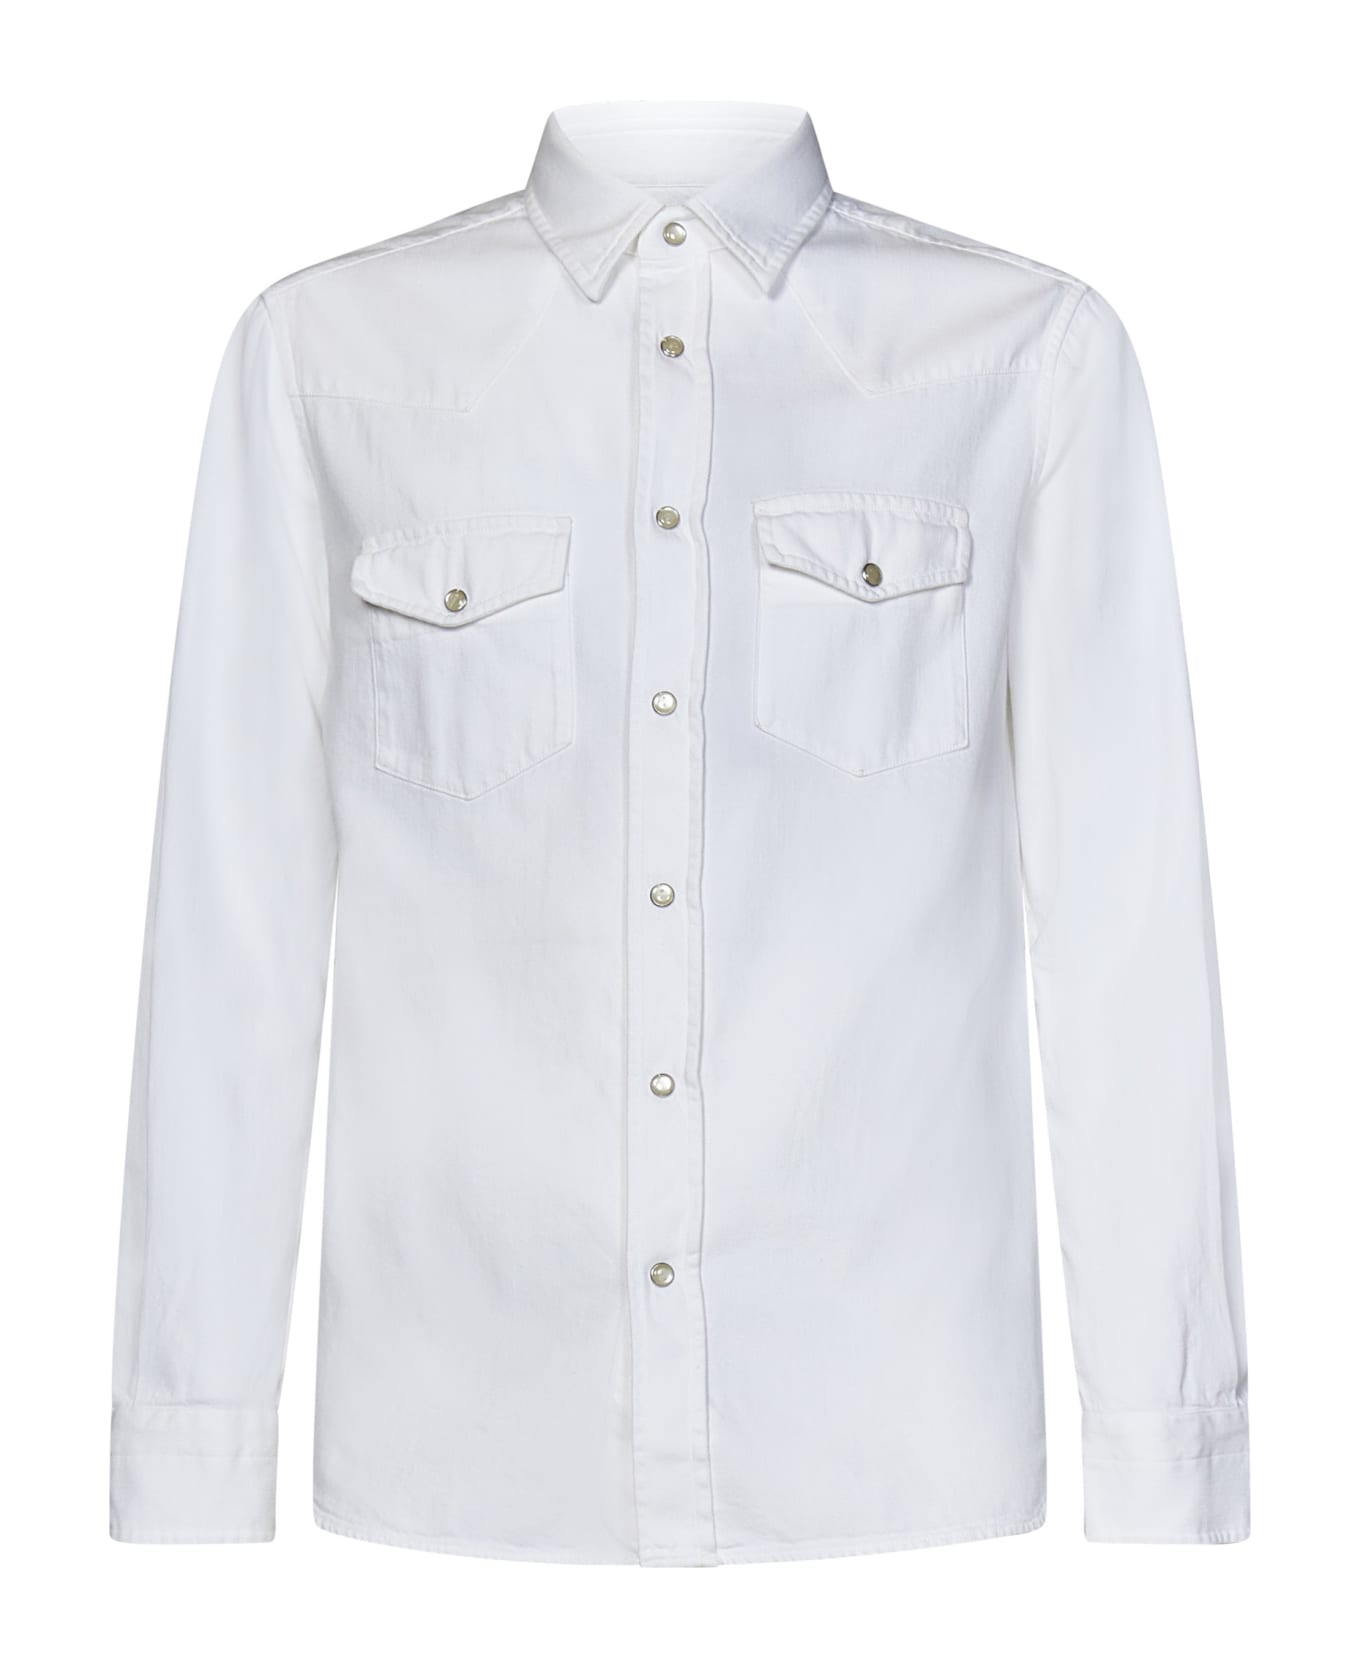 Tom Ford Patch Pocket Long-sleeved Shirt - White シャツ